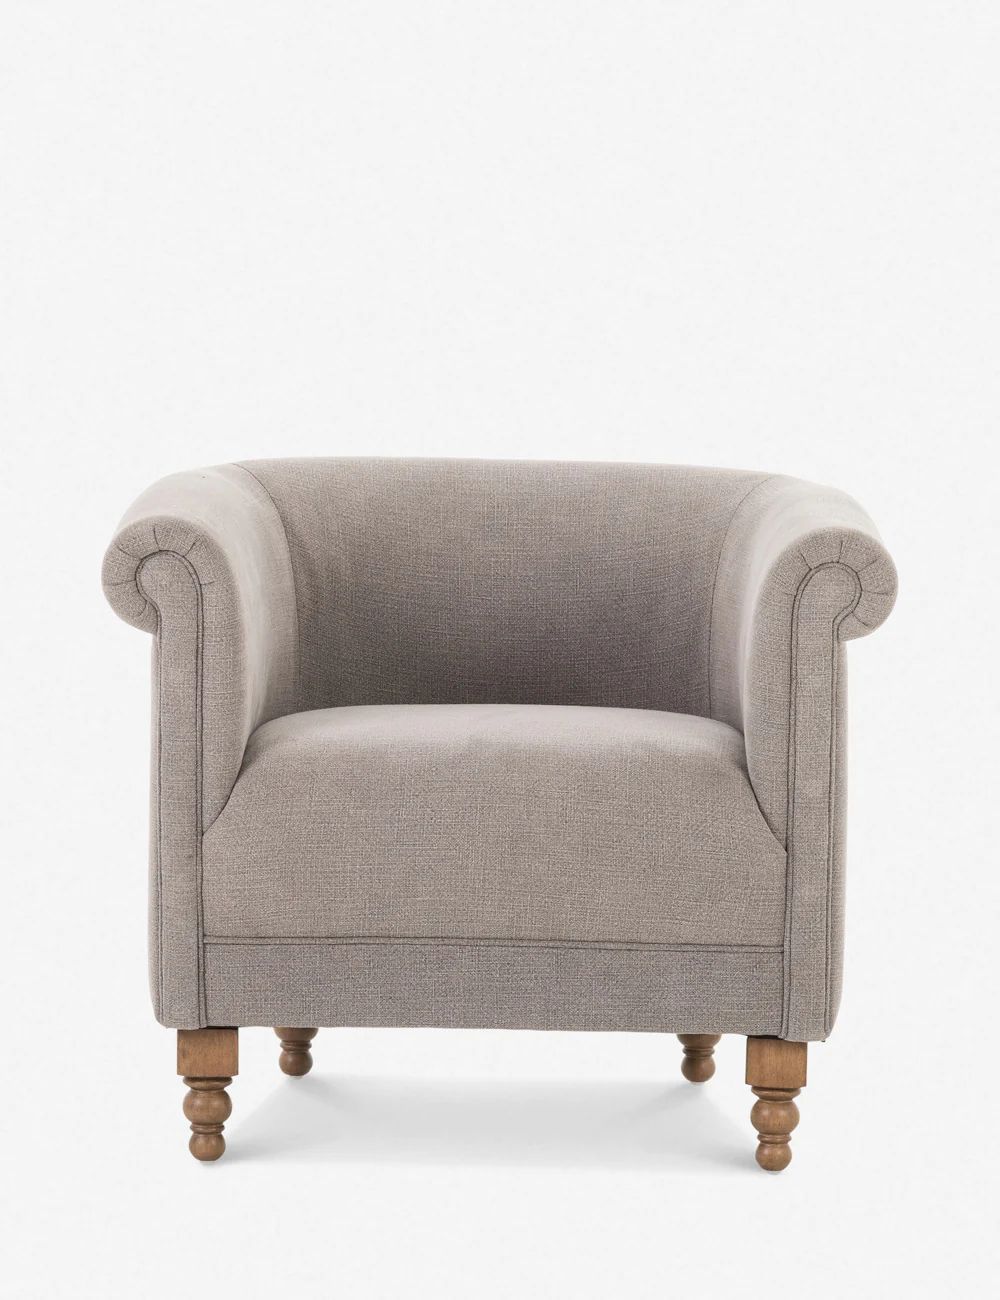 Stetson Accent Chair | Lulu and Georgia 